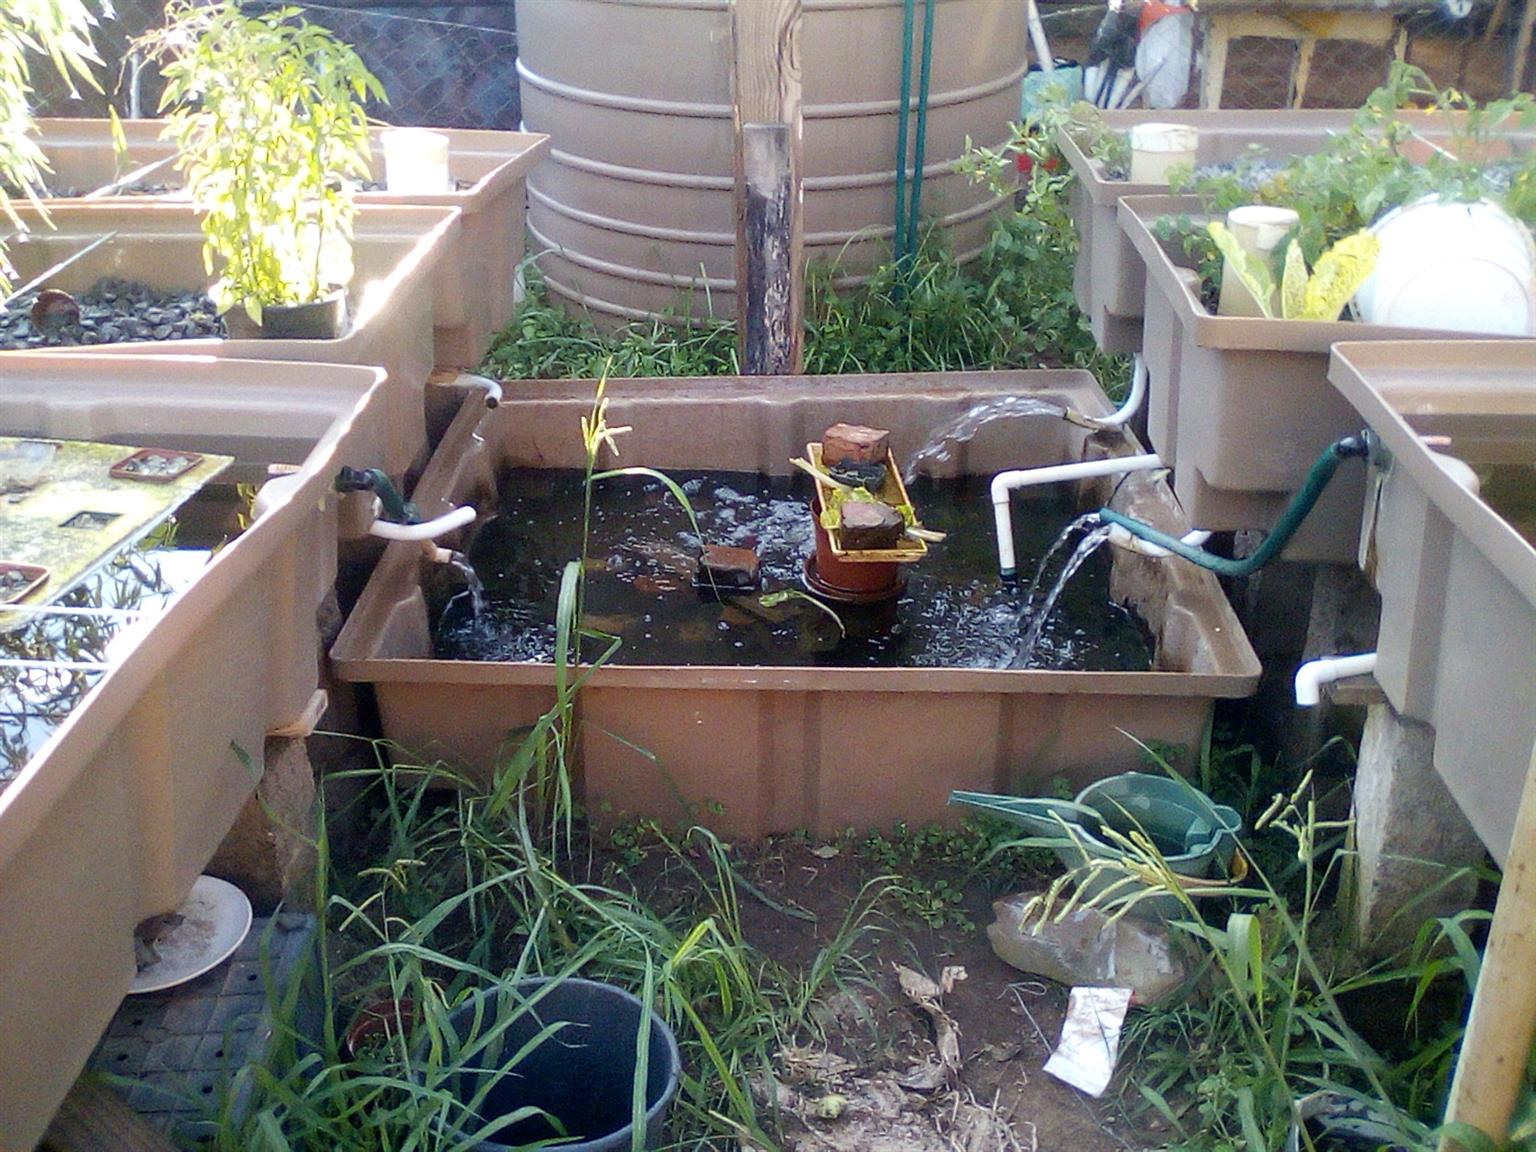 Fully functional Complete Aquaponics System